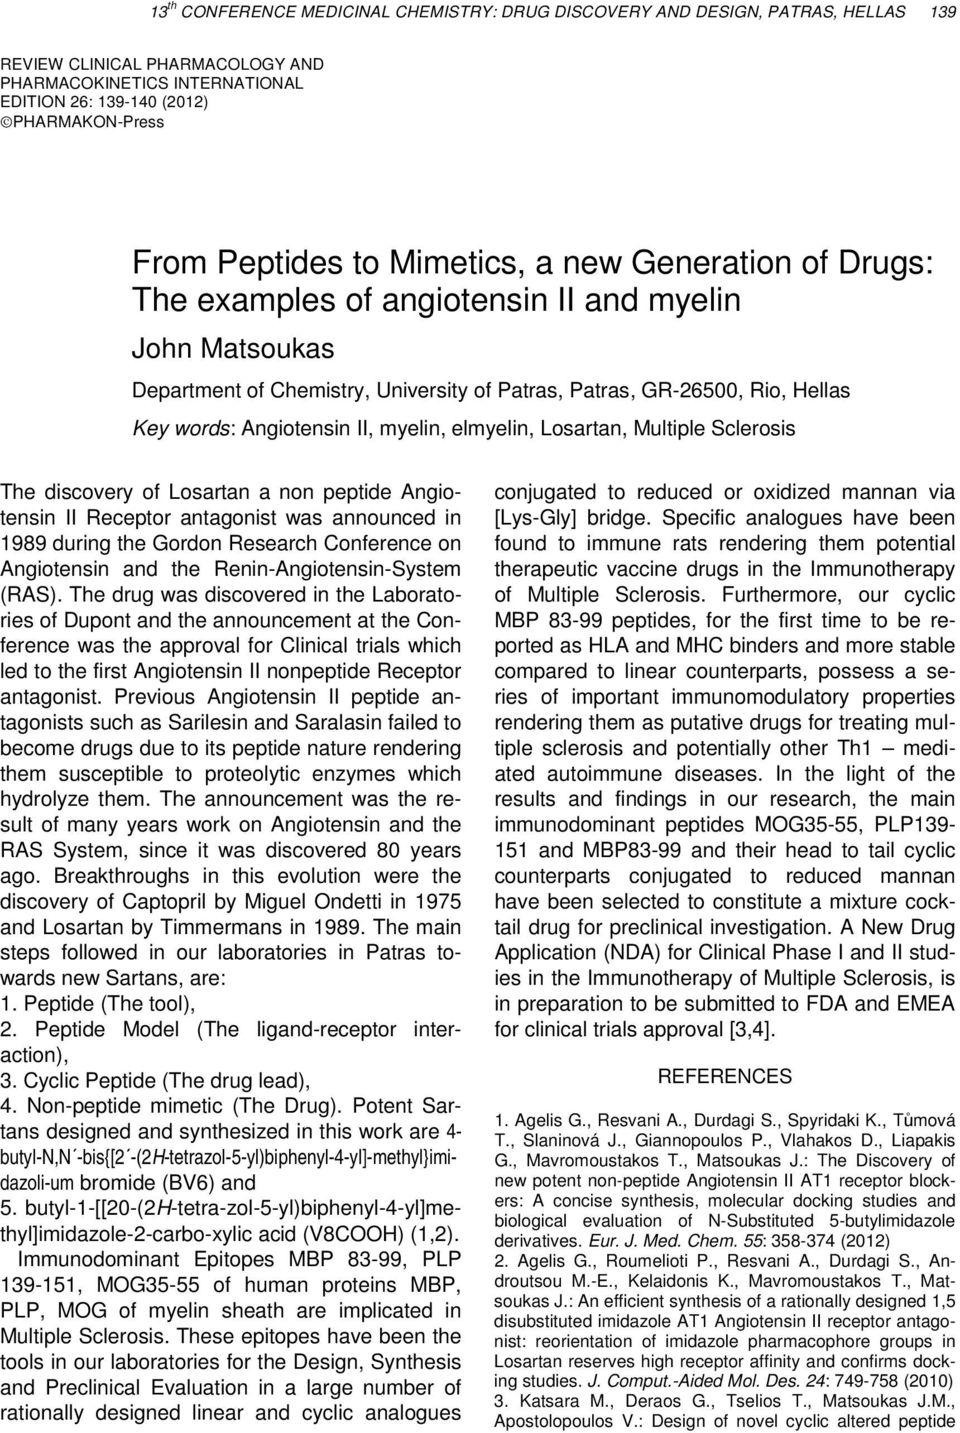 a non peptide Angiotensin II Receptor antagonist was announced in 1989 during the Gordon Research Conference on Angiotensin and the Renin-Angiotensin-System (RAS).